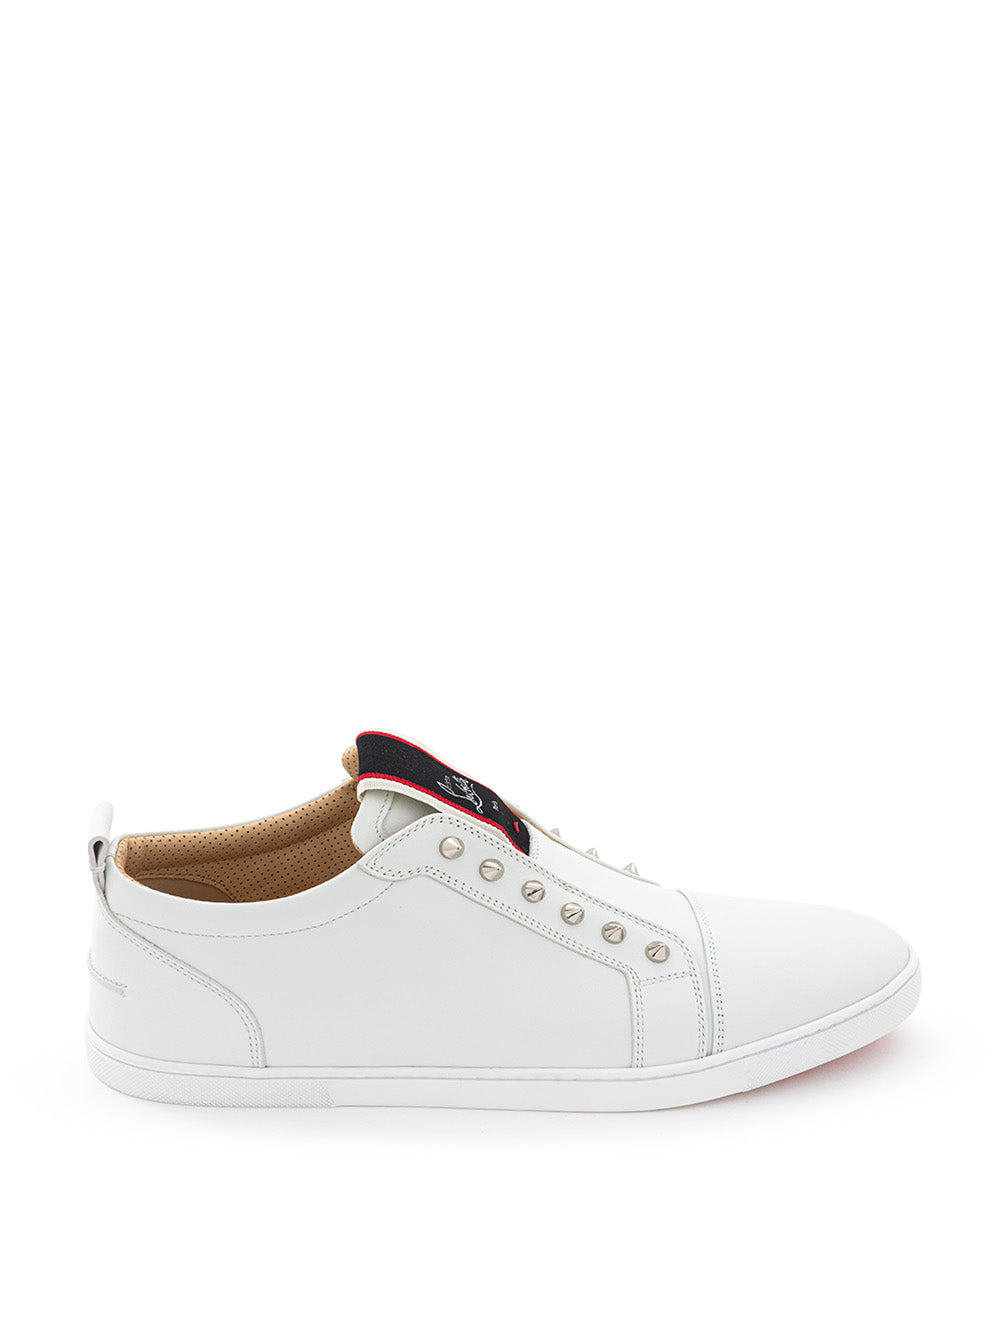 Sneaker F.A.V Fique a Vontade in Pelle Bianca Christian Louboutin